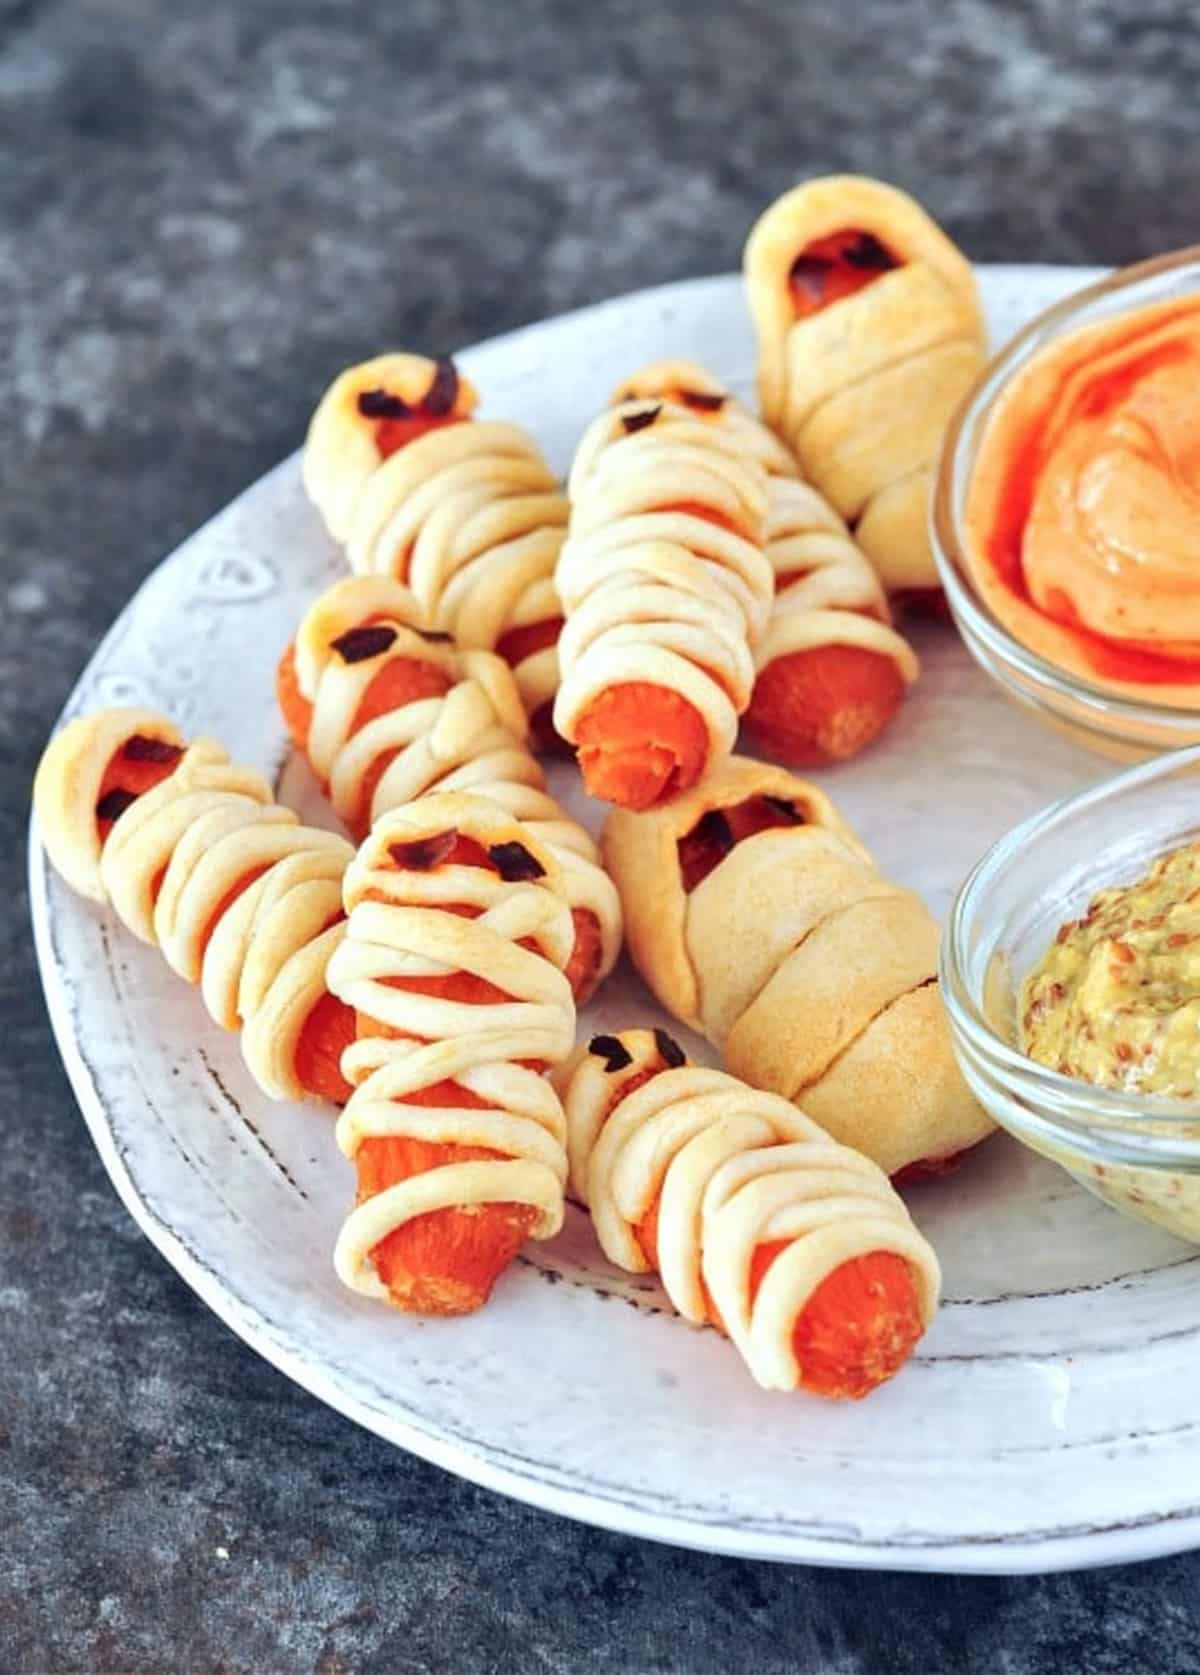 Mini carrots wrapped in pastry to look like mummies for Halloween sit on a serving plate with small glass bowls of hot sauce and mustard.